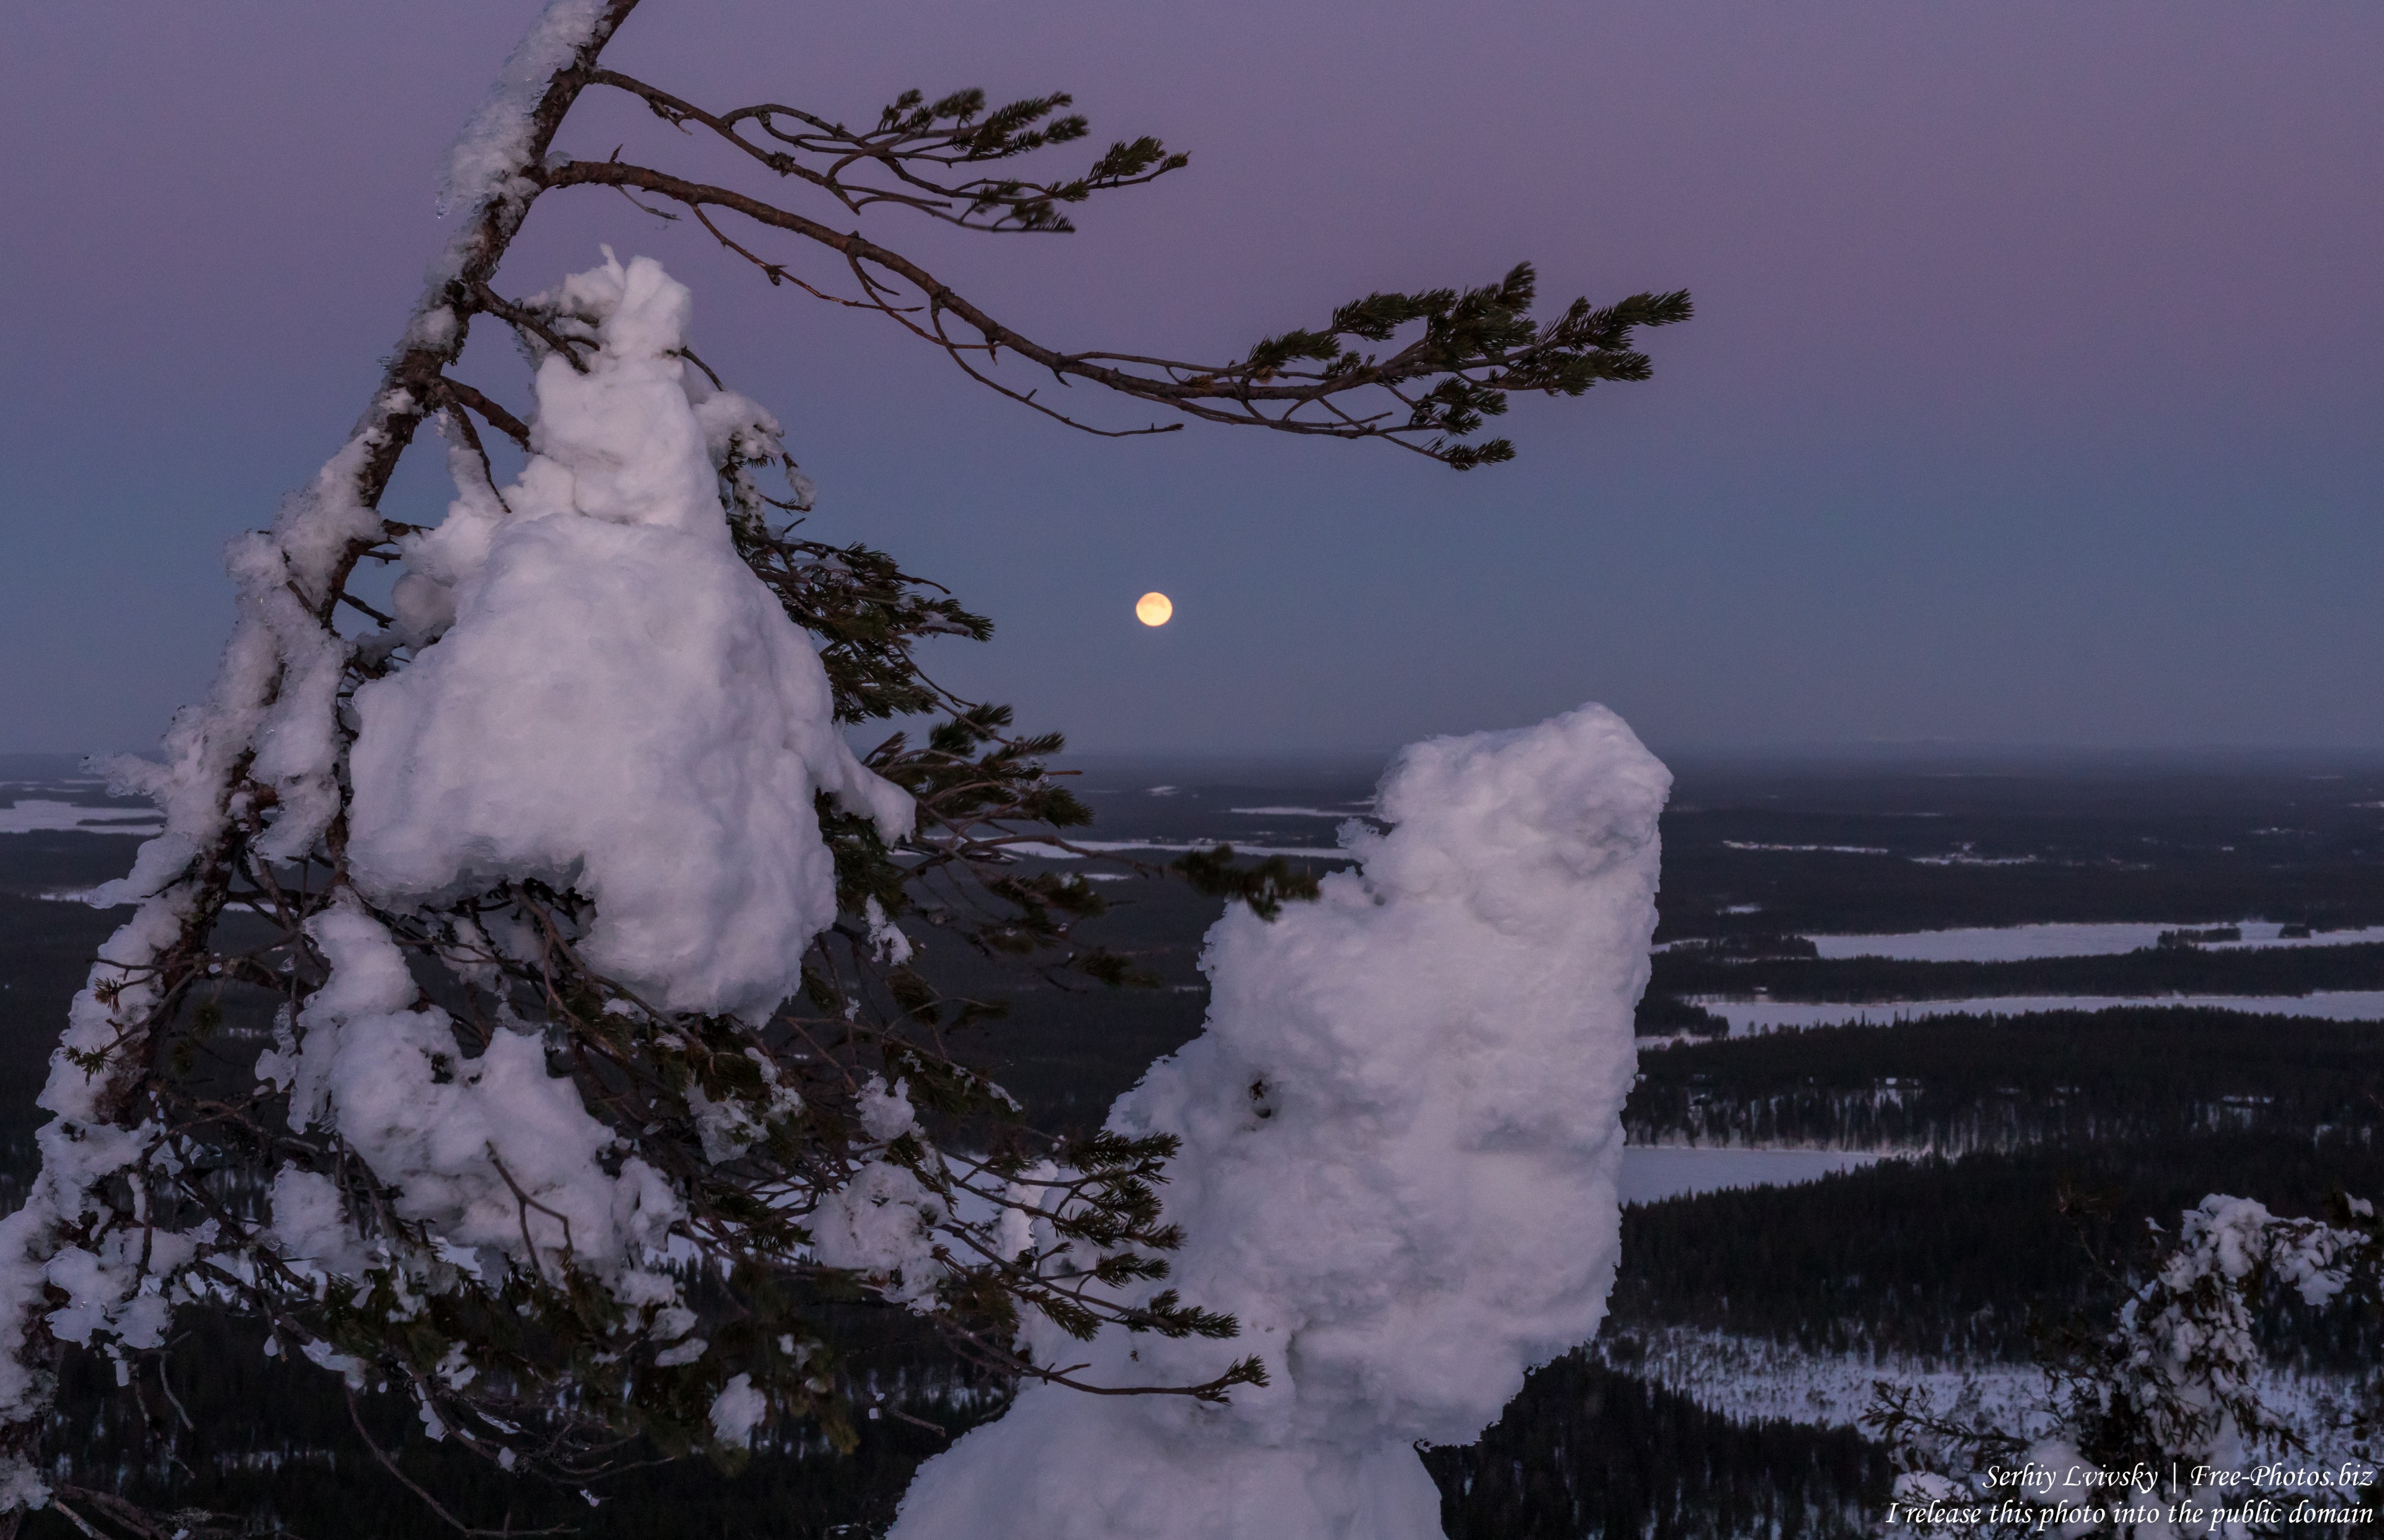 Valtavaara, Finland, photographed in January 2020 by Serhiy Lvivsky, picture 1